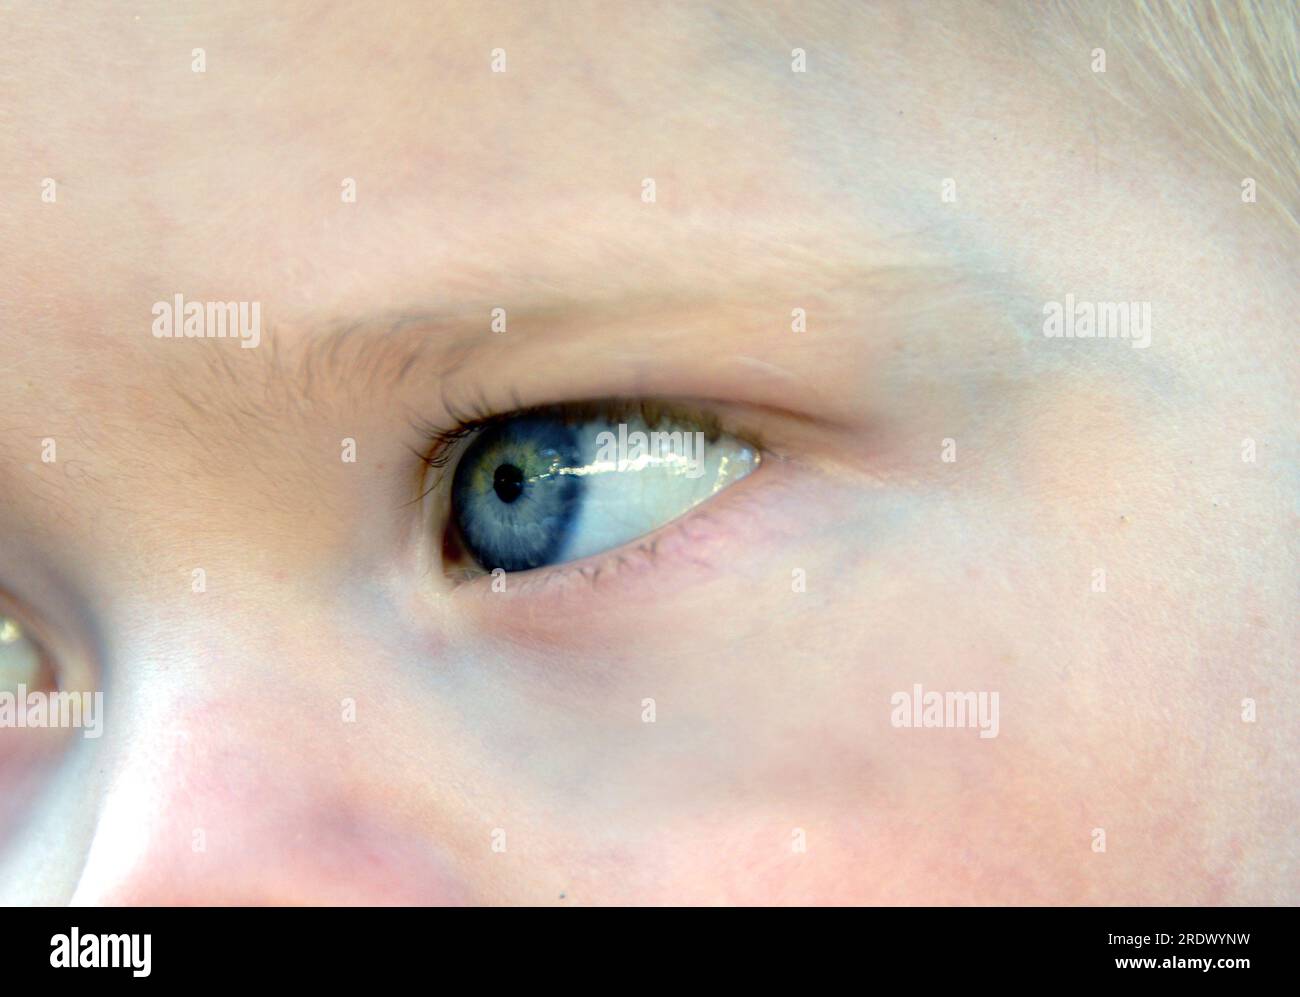 Blue eye on a baby boy glances away to the side.  Extreme closeup of infants eye. Stock Photo